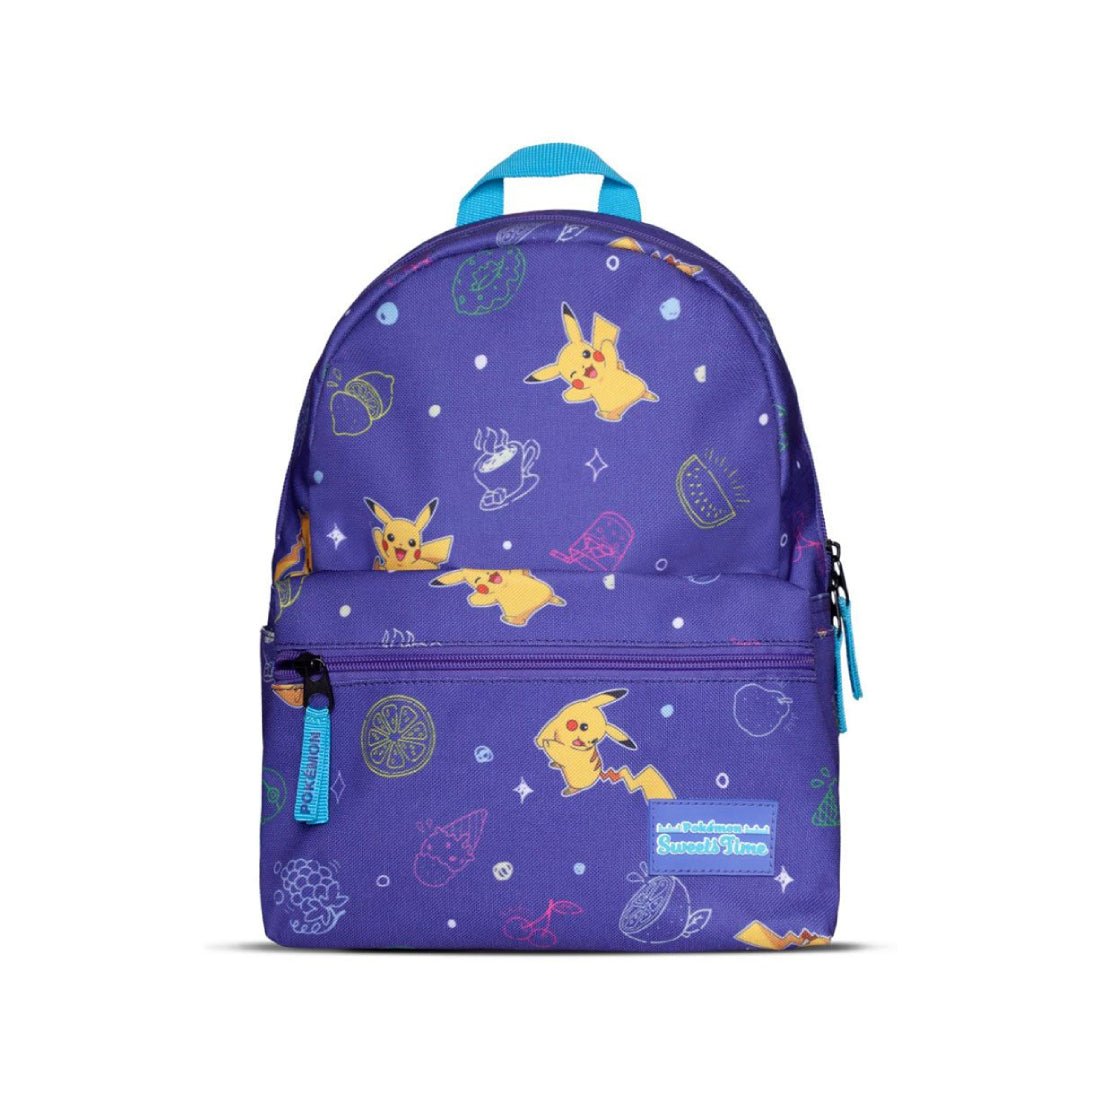 Difuzed Pokémon Colorful Pikachu Backpack - Smaller Size - حقيبة ظهر - Store 974 | ستور ٩٧٤